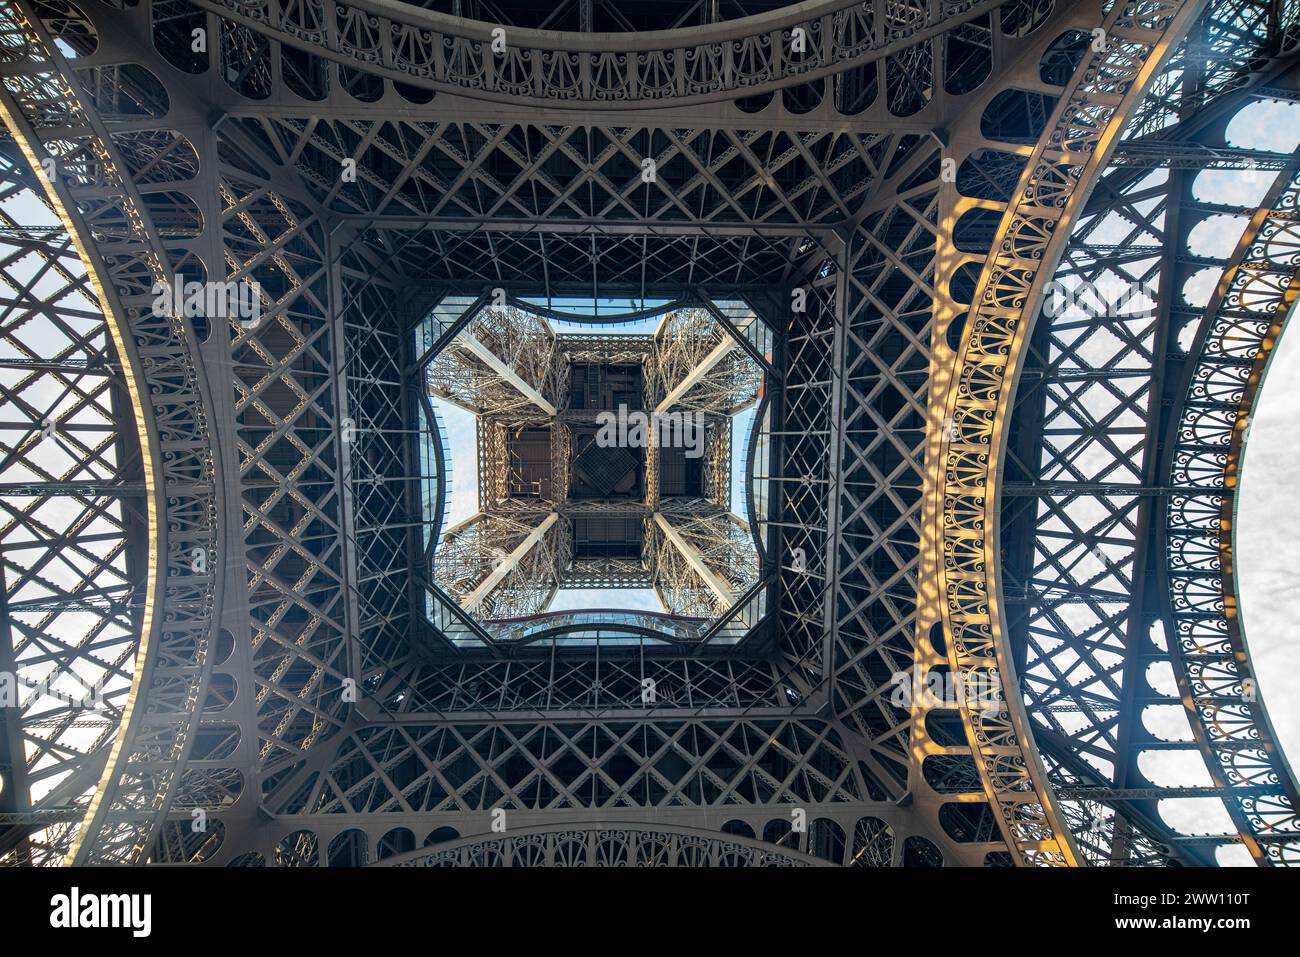 The Eiffel Tower stands tall against the blue sky in Paris. Stock Photo